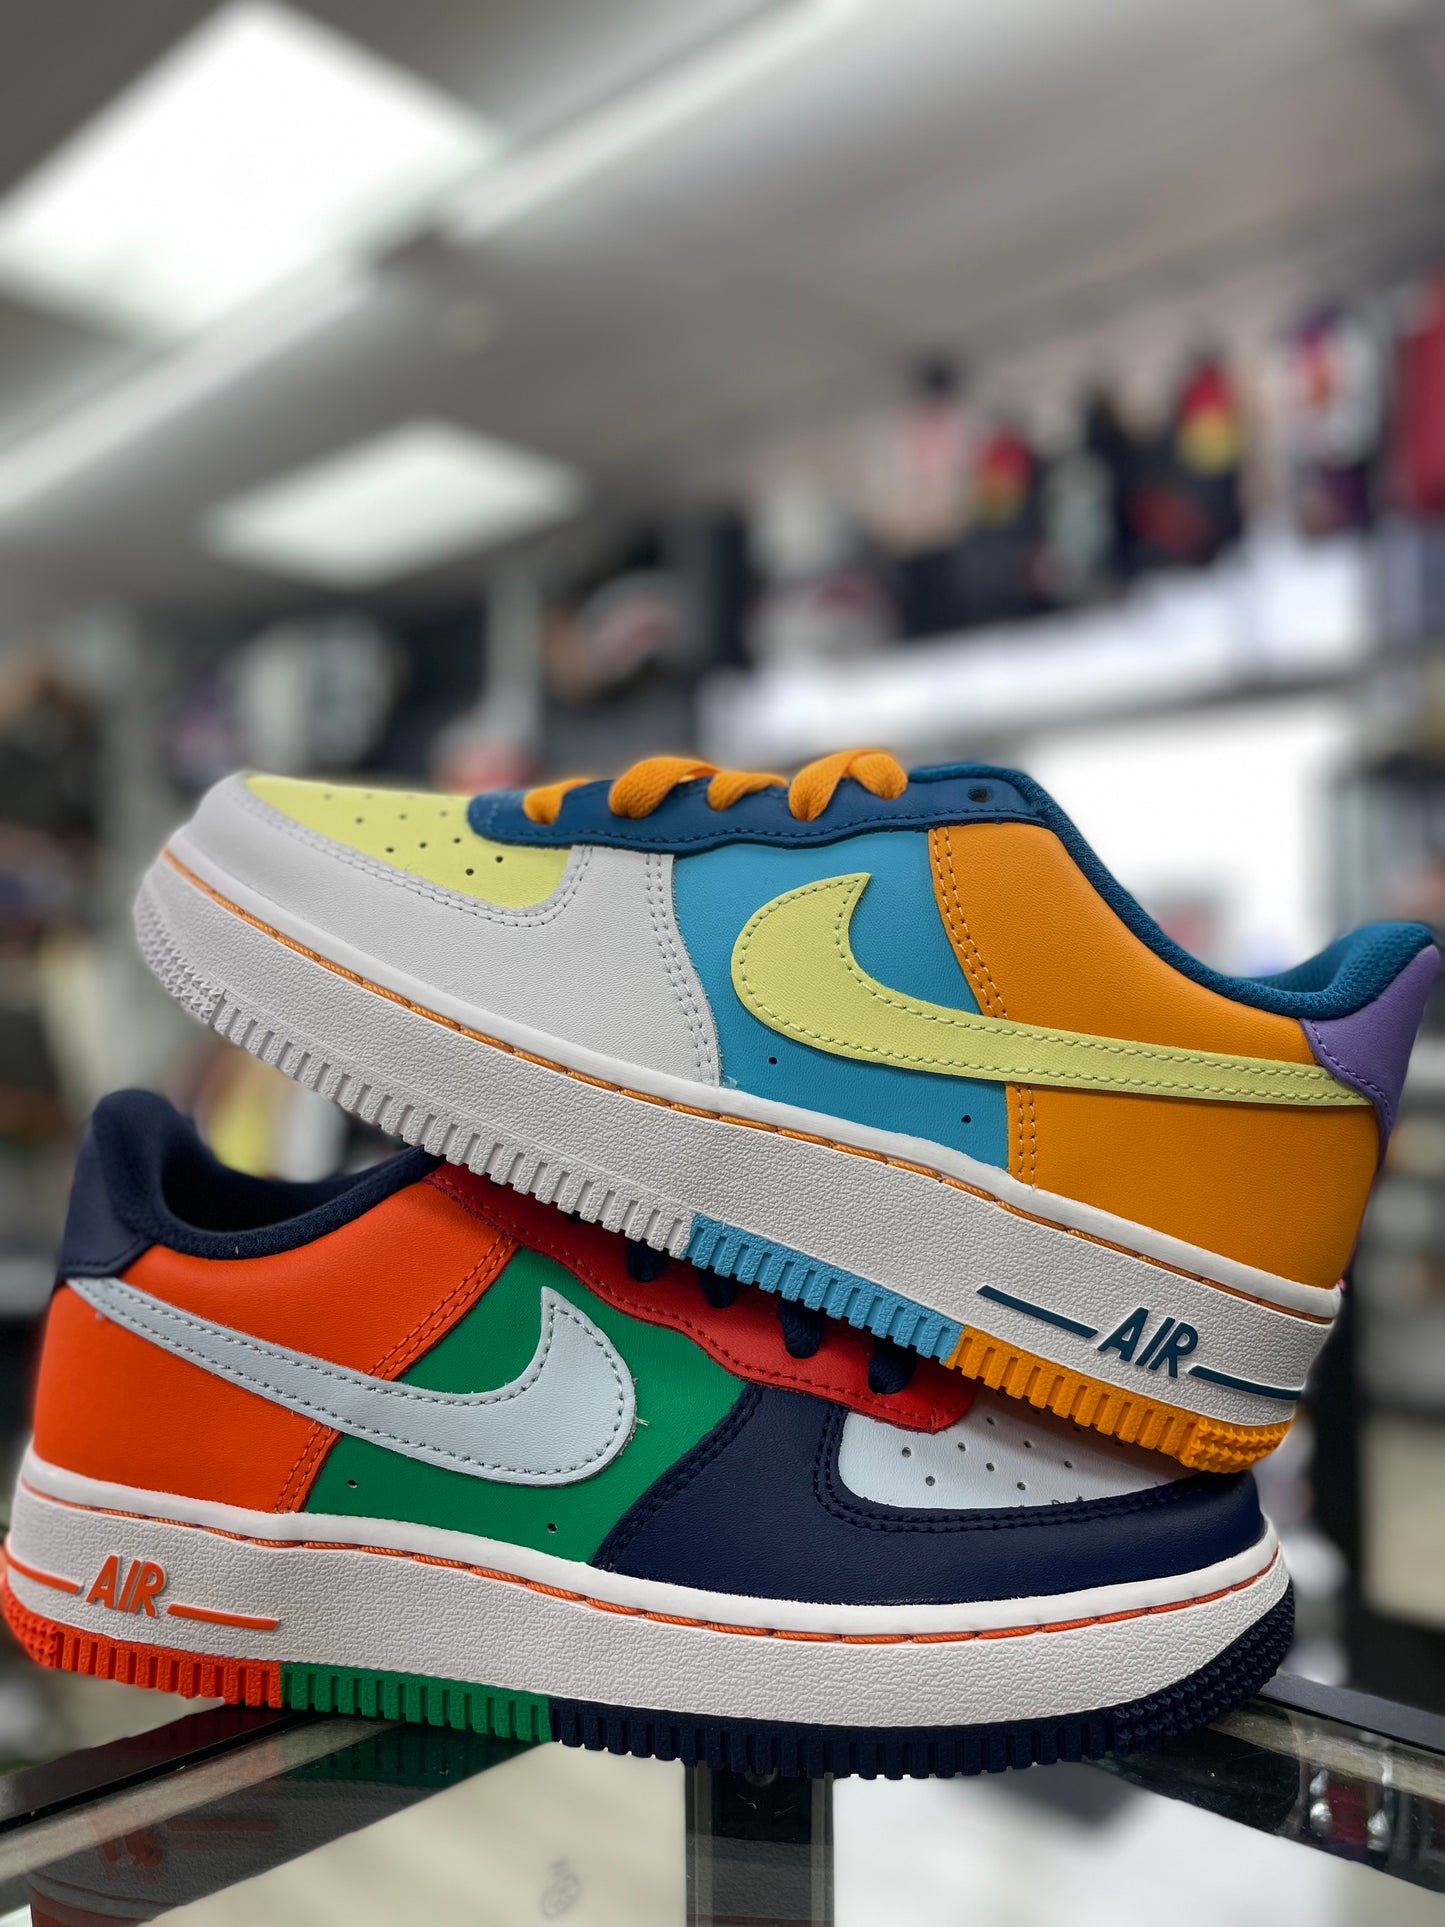 Nike Air Force 1 Low "Multicolor" (GS)